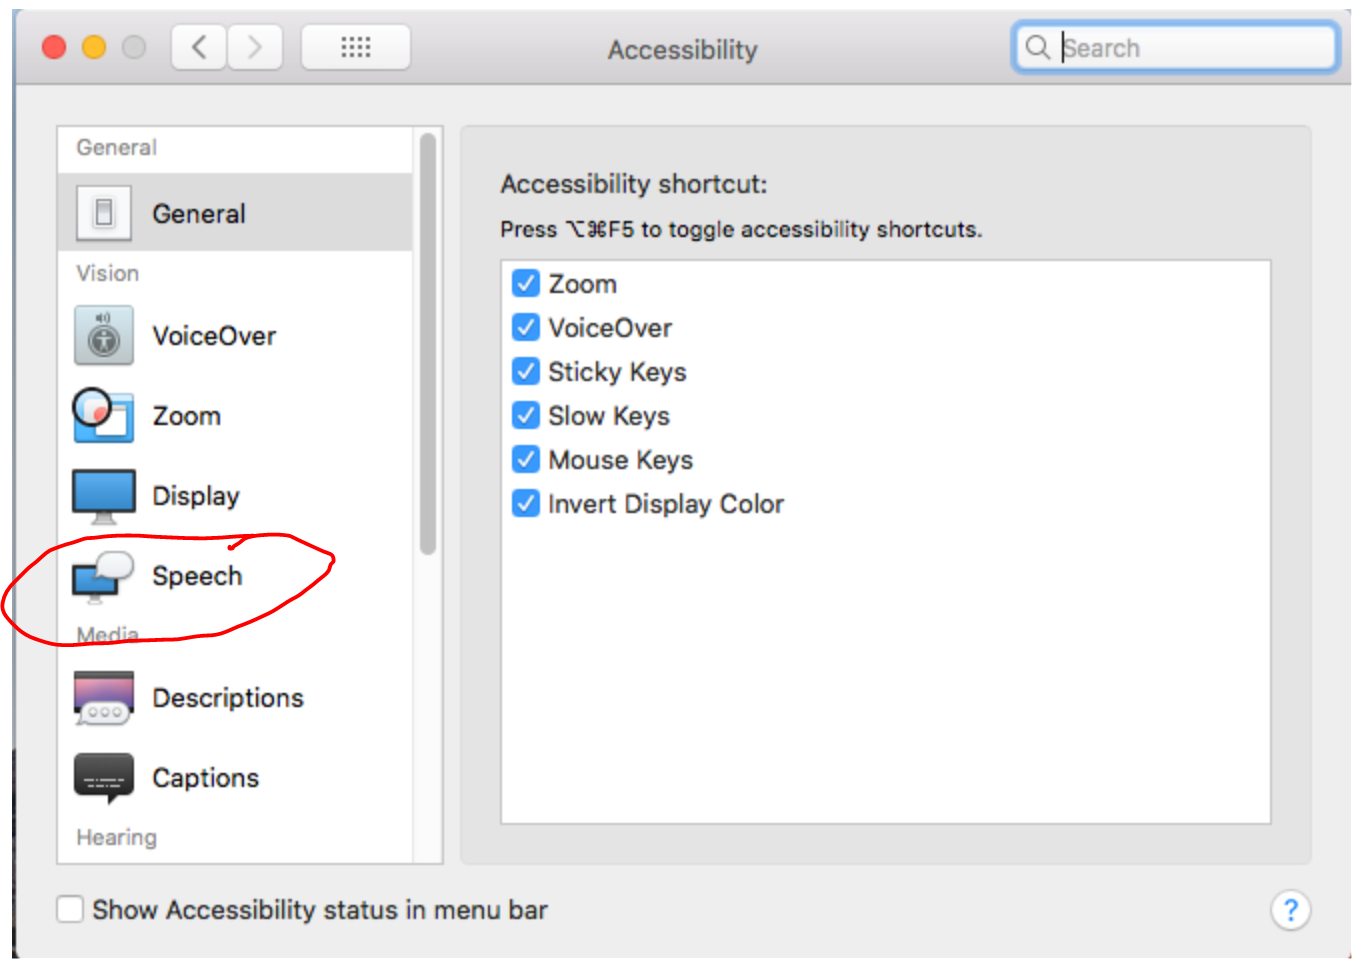 in the accessibility features, on the menu on the left, speech is circled